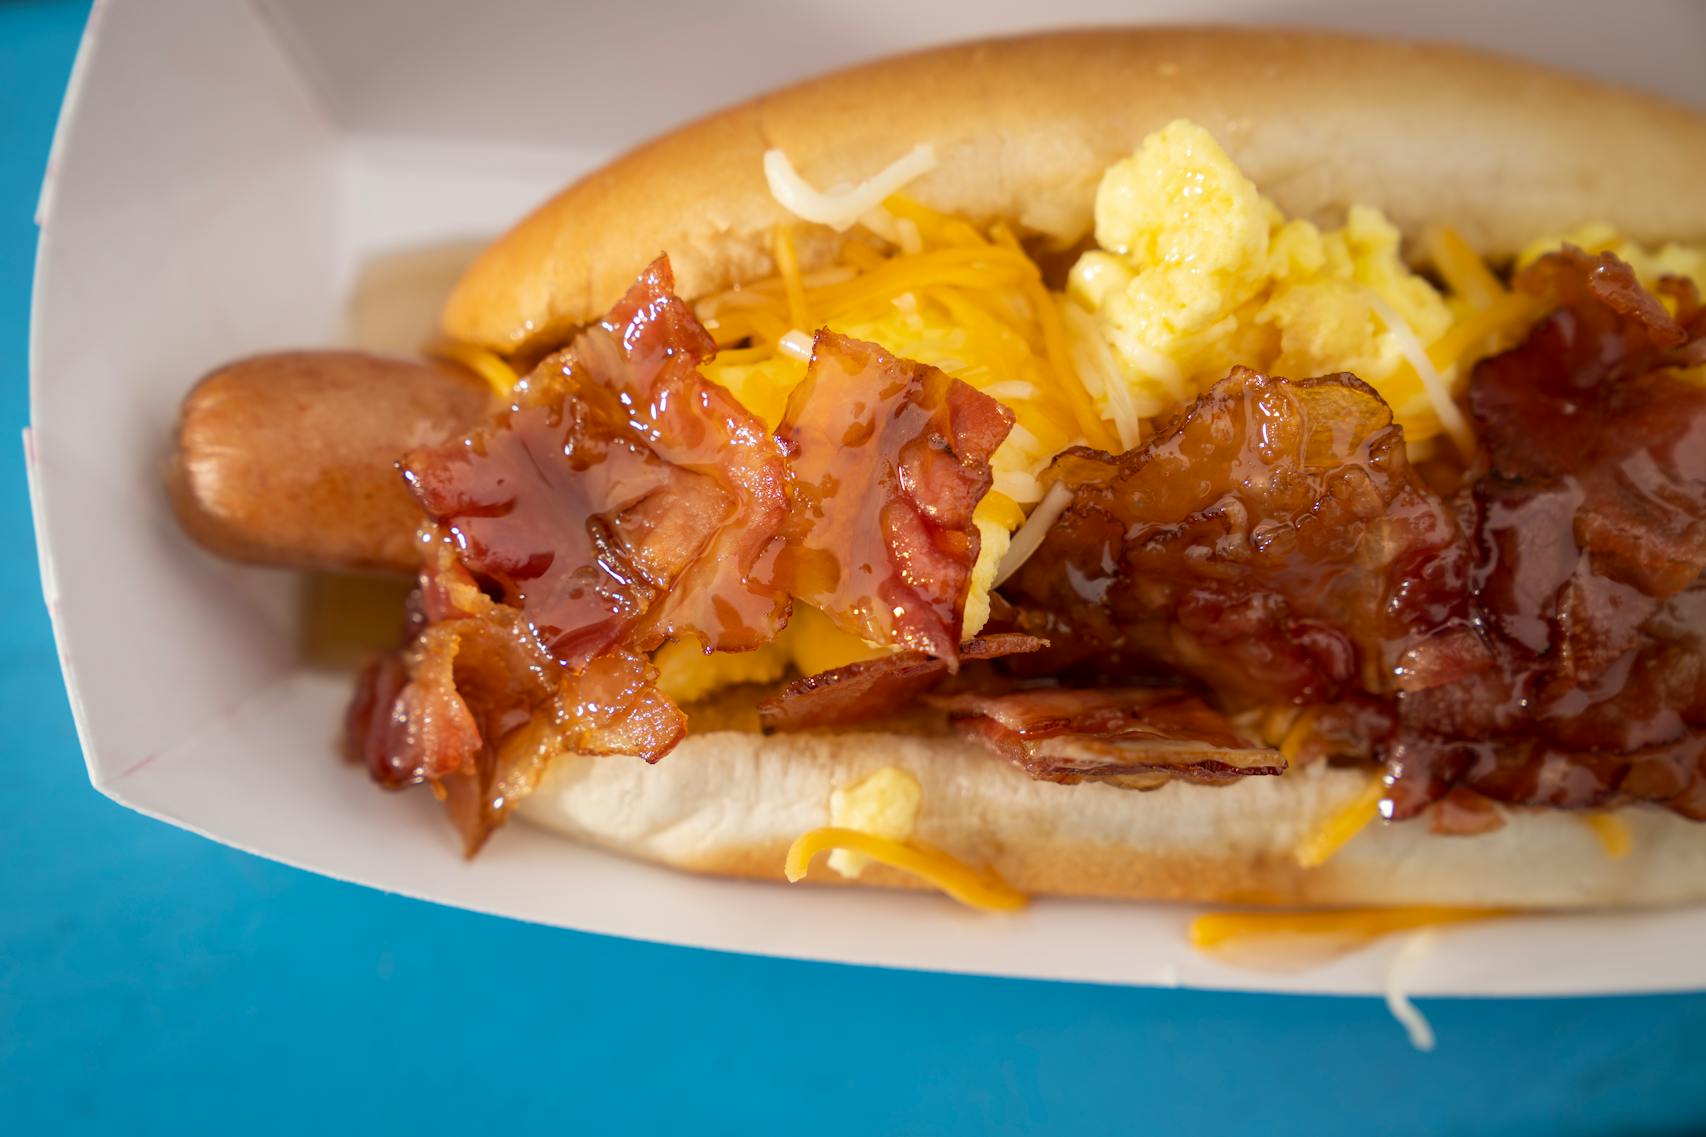 Porkette Breakfast Sandwich from Peters Hot Dogs. The new foods of the 2023 Minnesota State Fair photographed on the first day of the fair in Falcon Heights, Minn. on Tuesday, Aug. 8, 2023. ] LEILA NAVIDI • leila.navidi@startribune.com